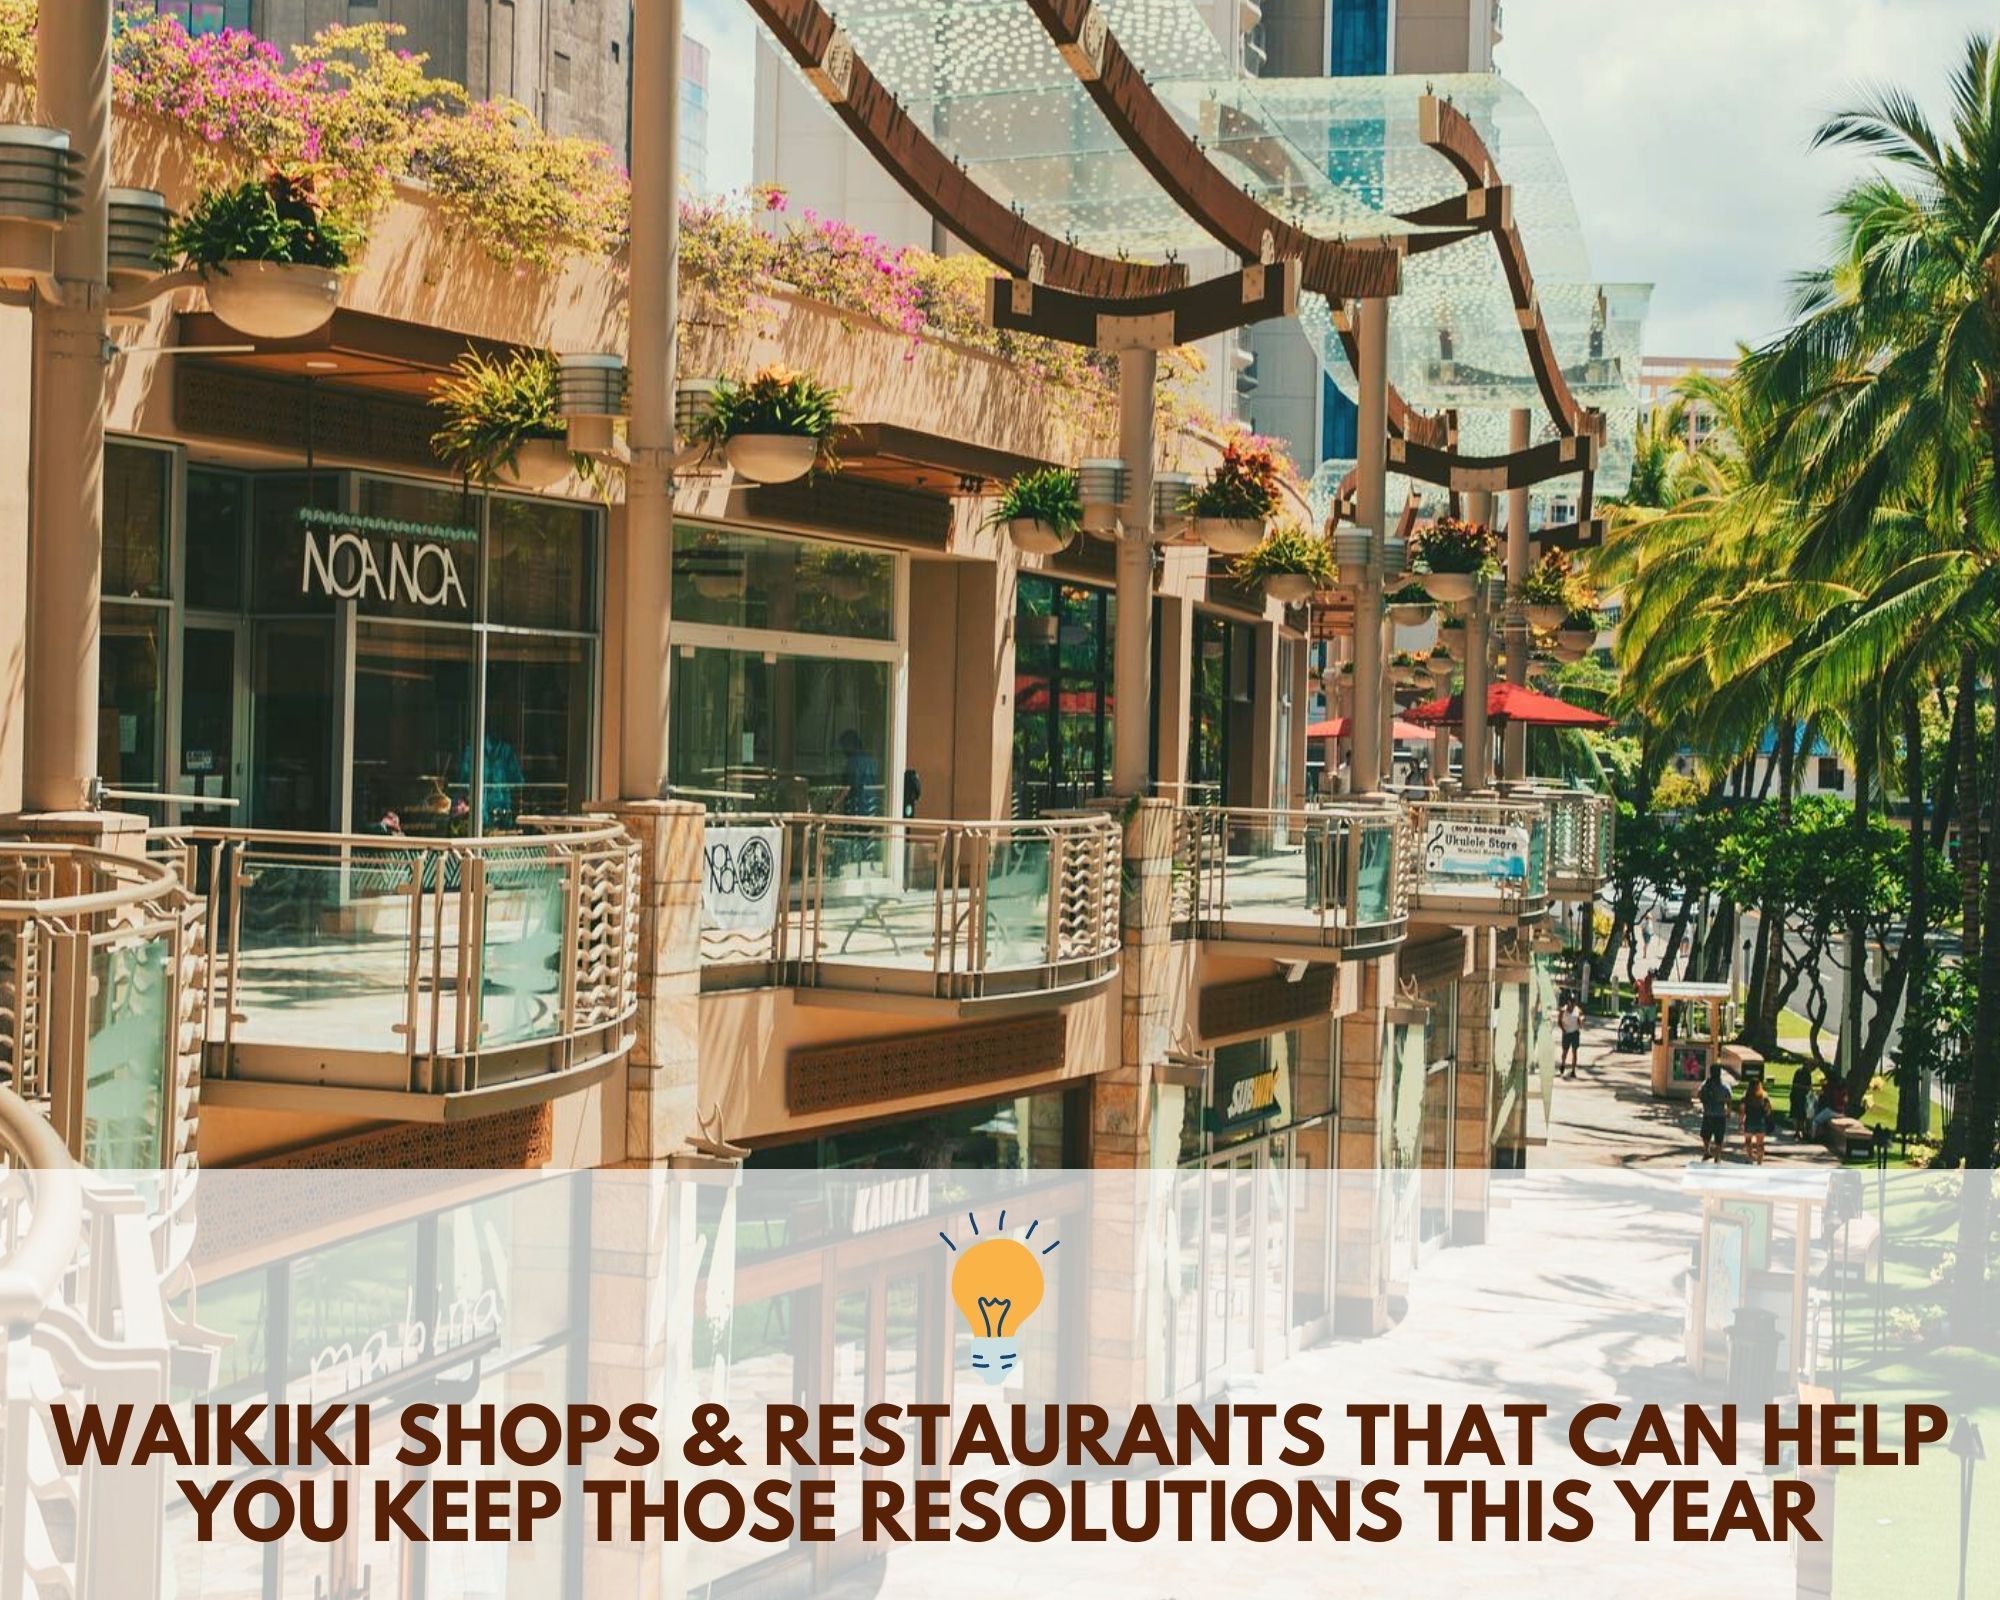 Waikiki Shops & Restaurants That Can Help You Keep Those Resolutions This Year